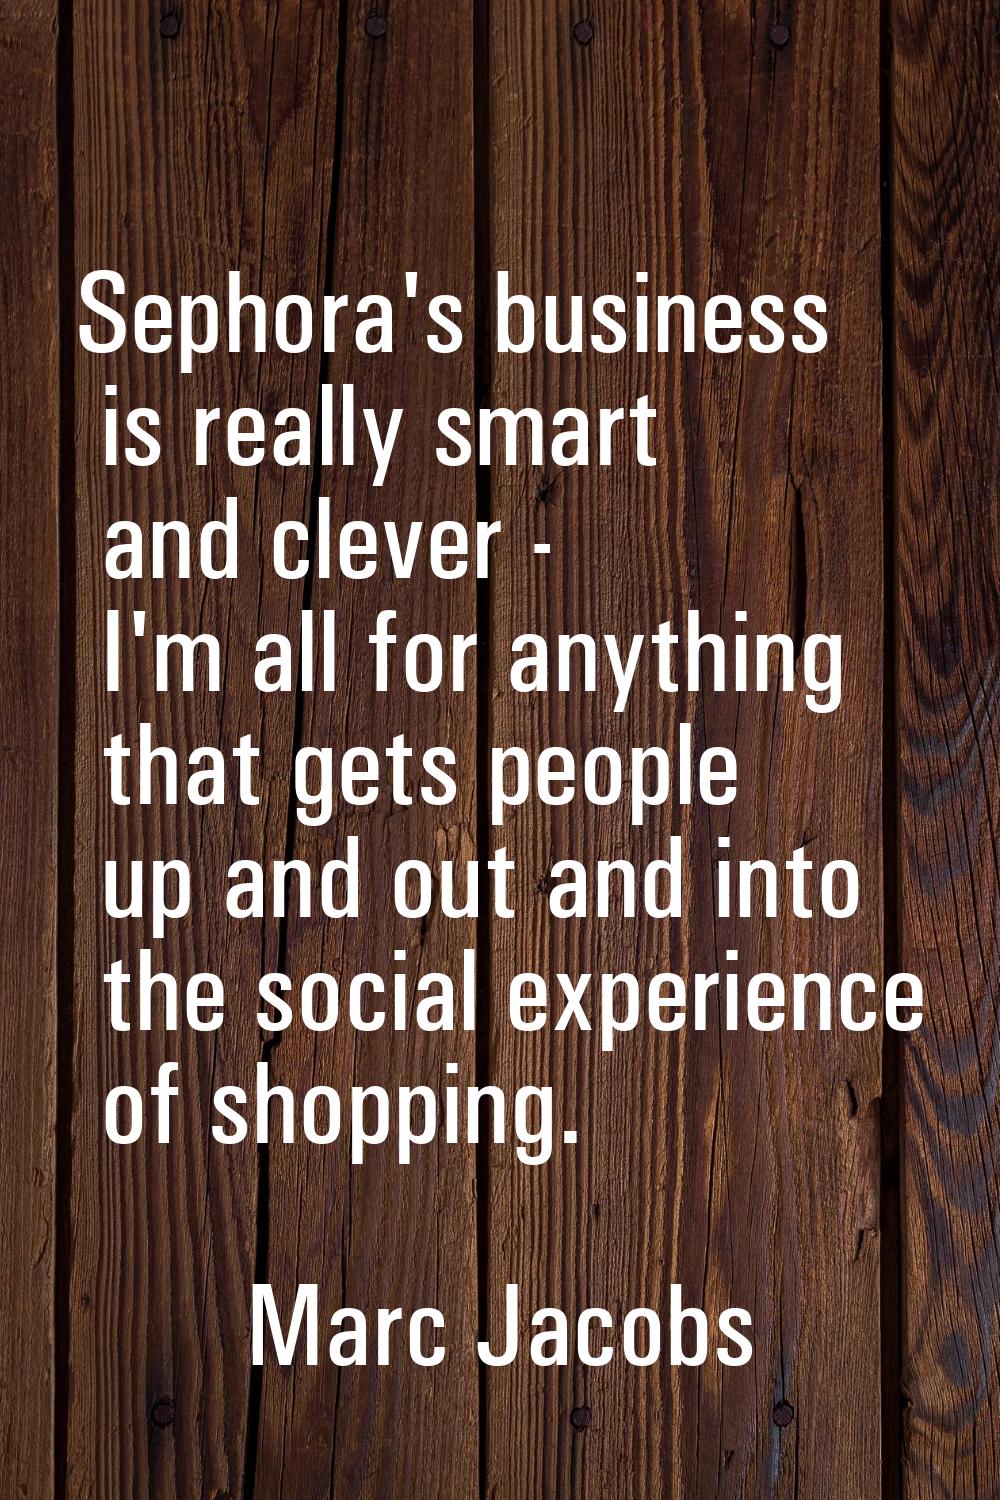 Sephora's business is really smart and clever - I'm all for anything that gets people up and out an